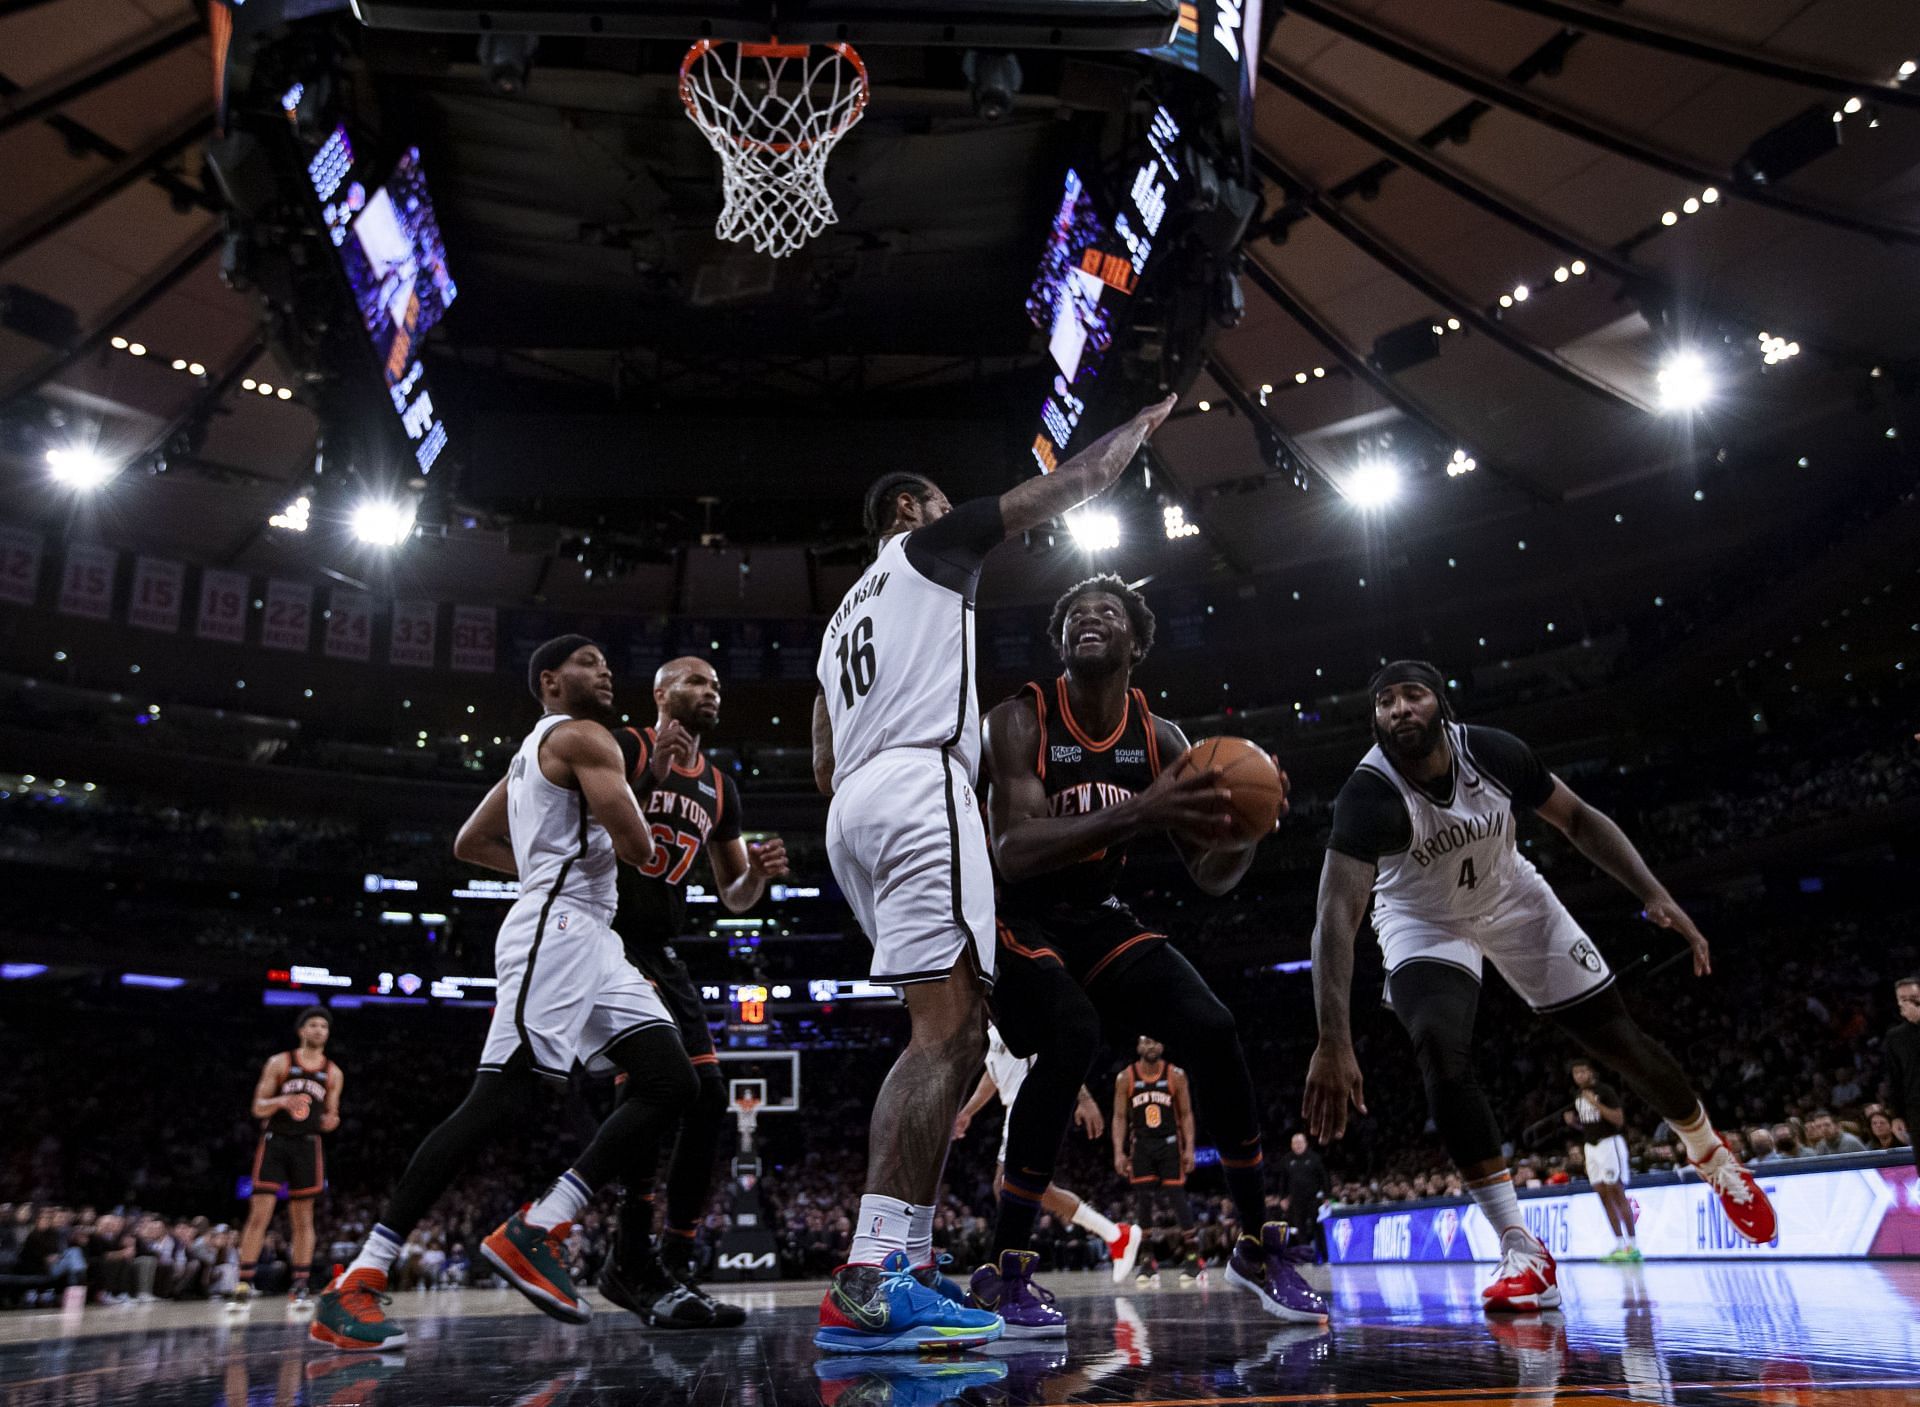 The New York Knicks last time out against the Brooklyn Nets